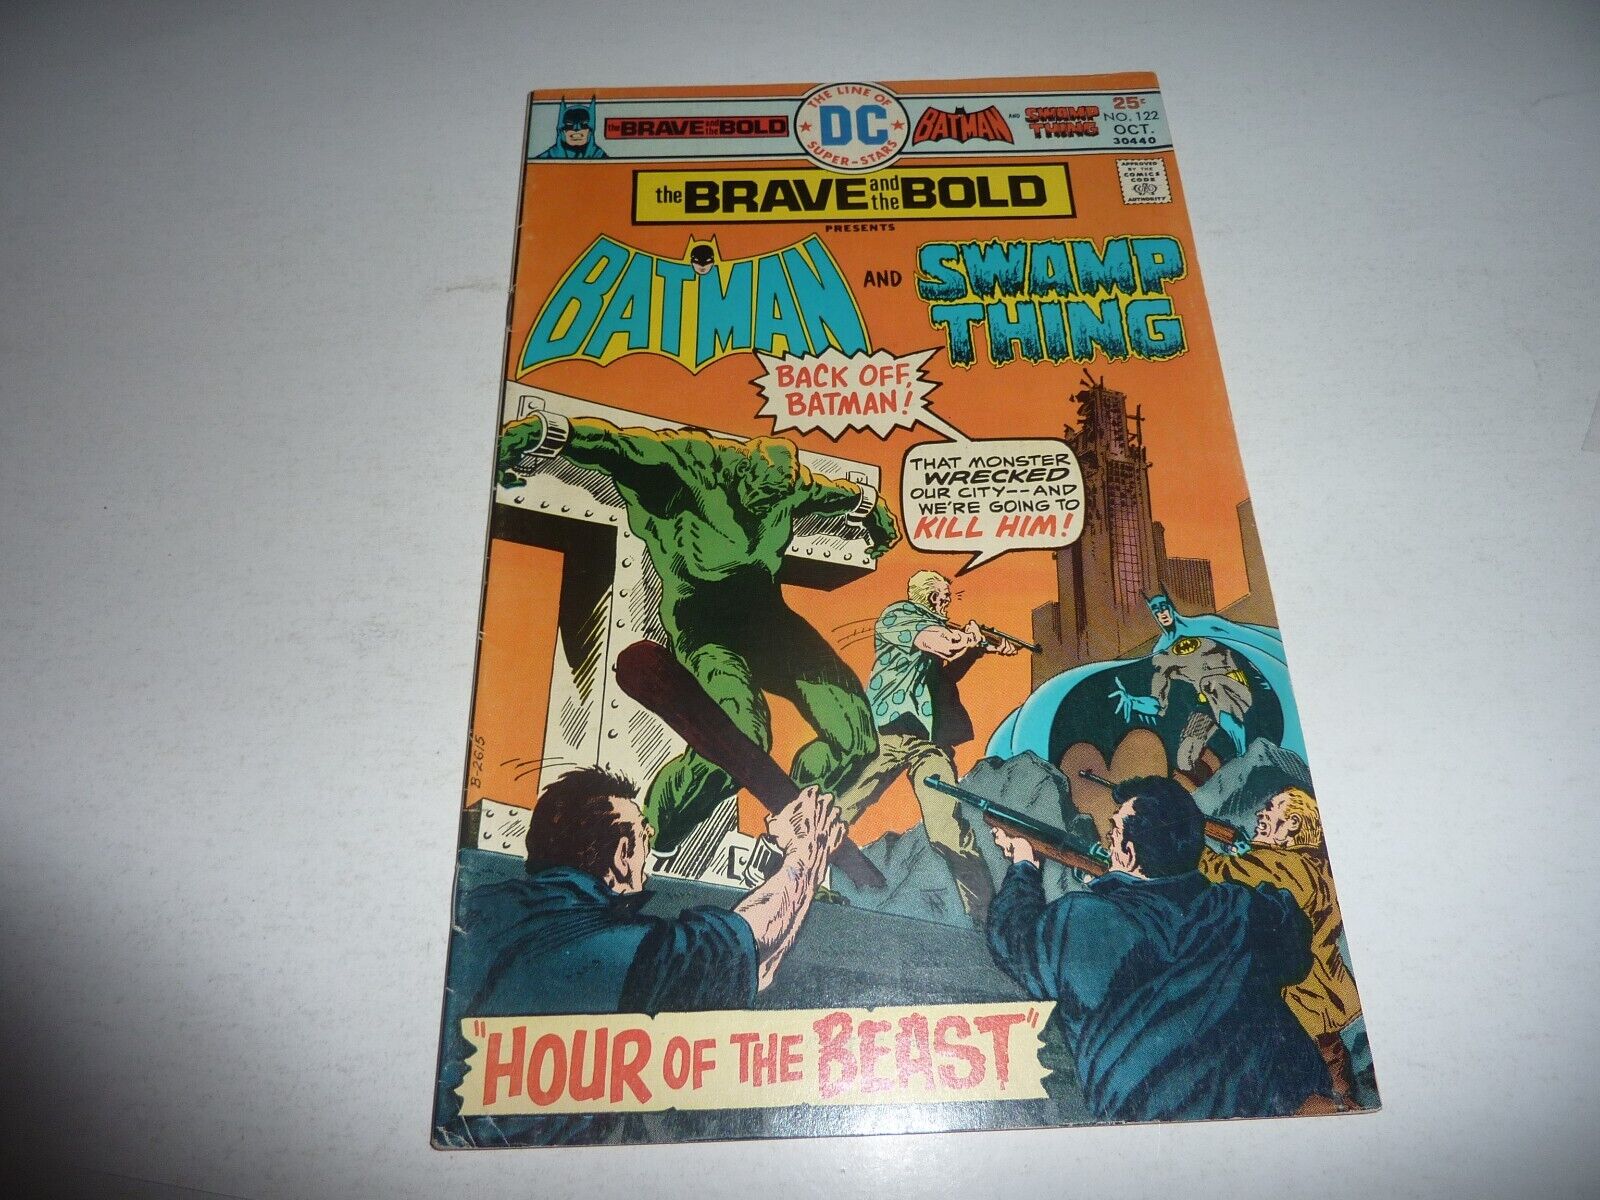 BRAVE AND THE BOLD #122 DC Comics 1975 Batman Swamp Thing FN 6.0